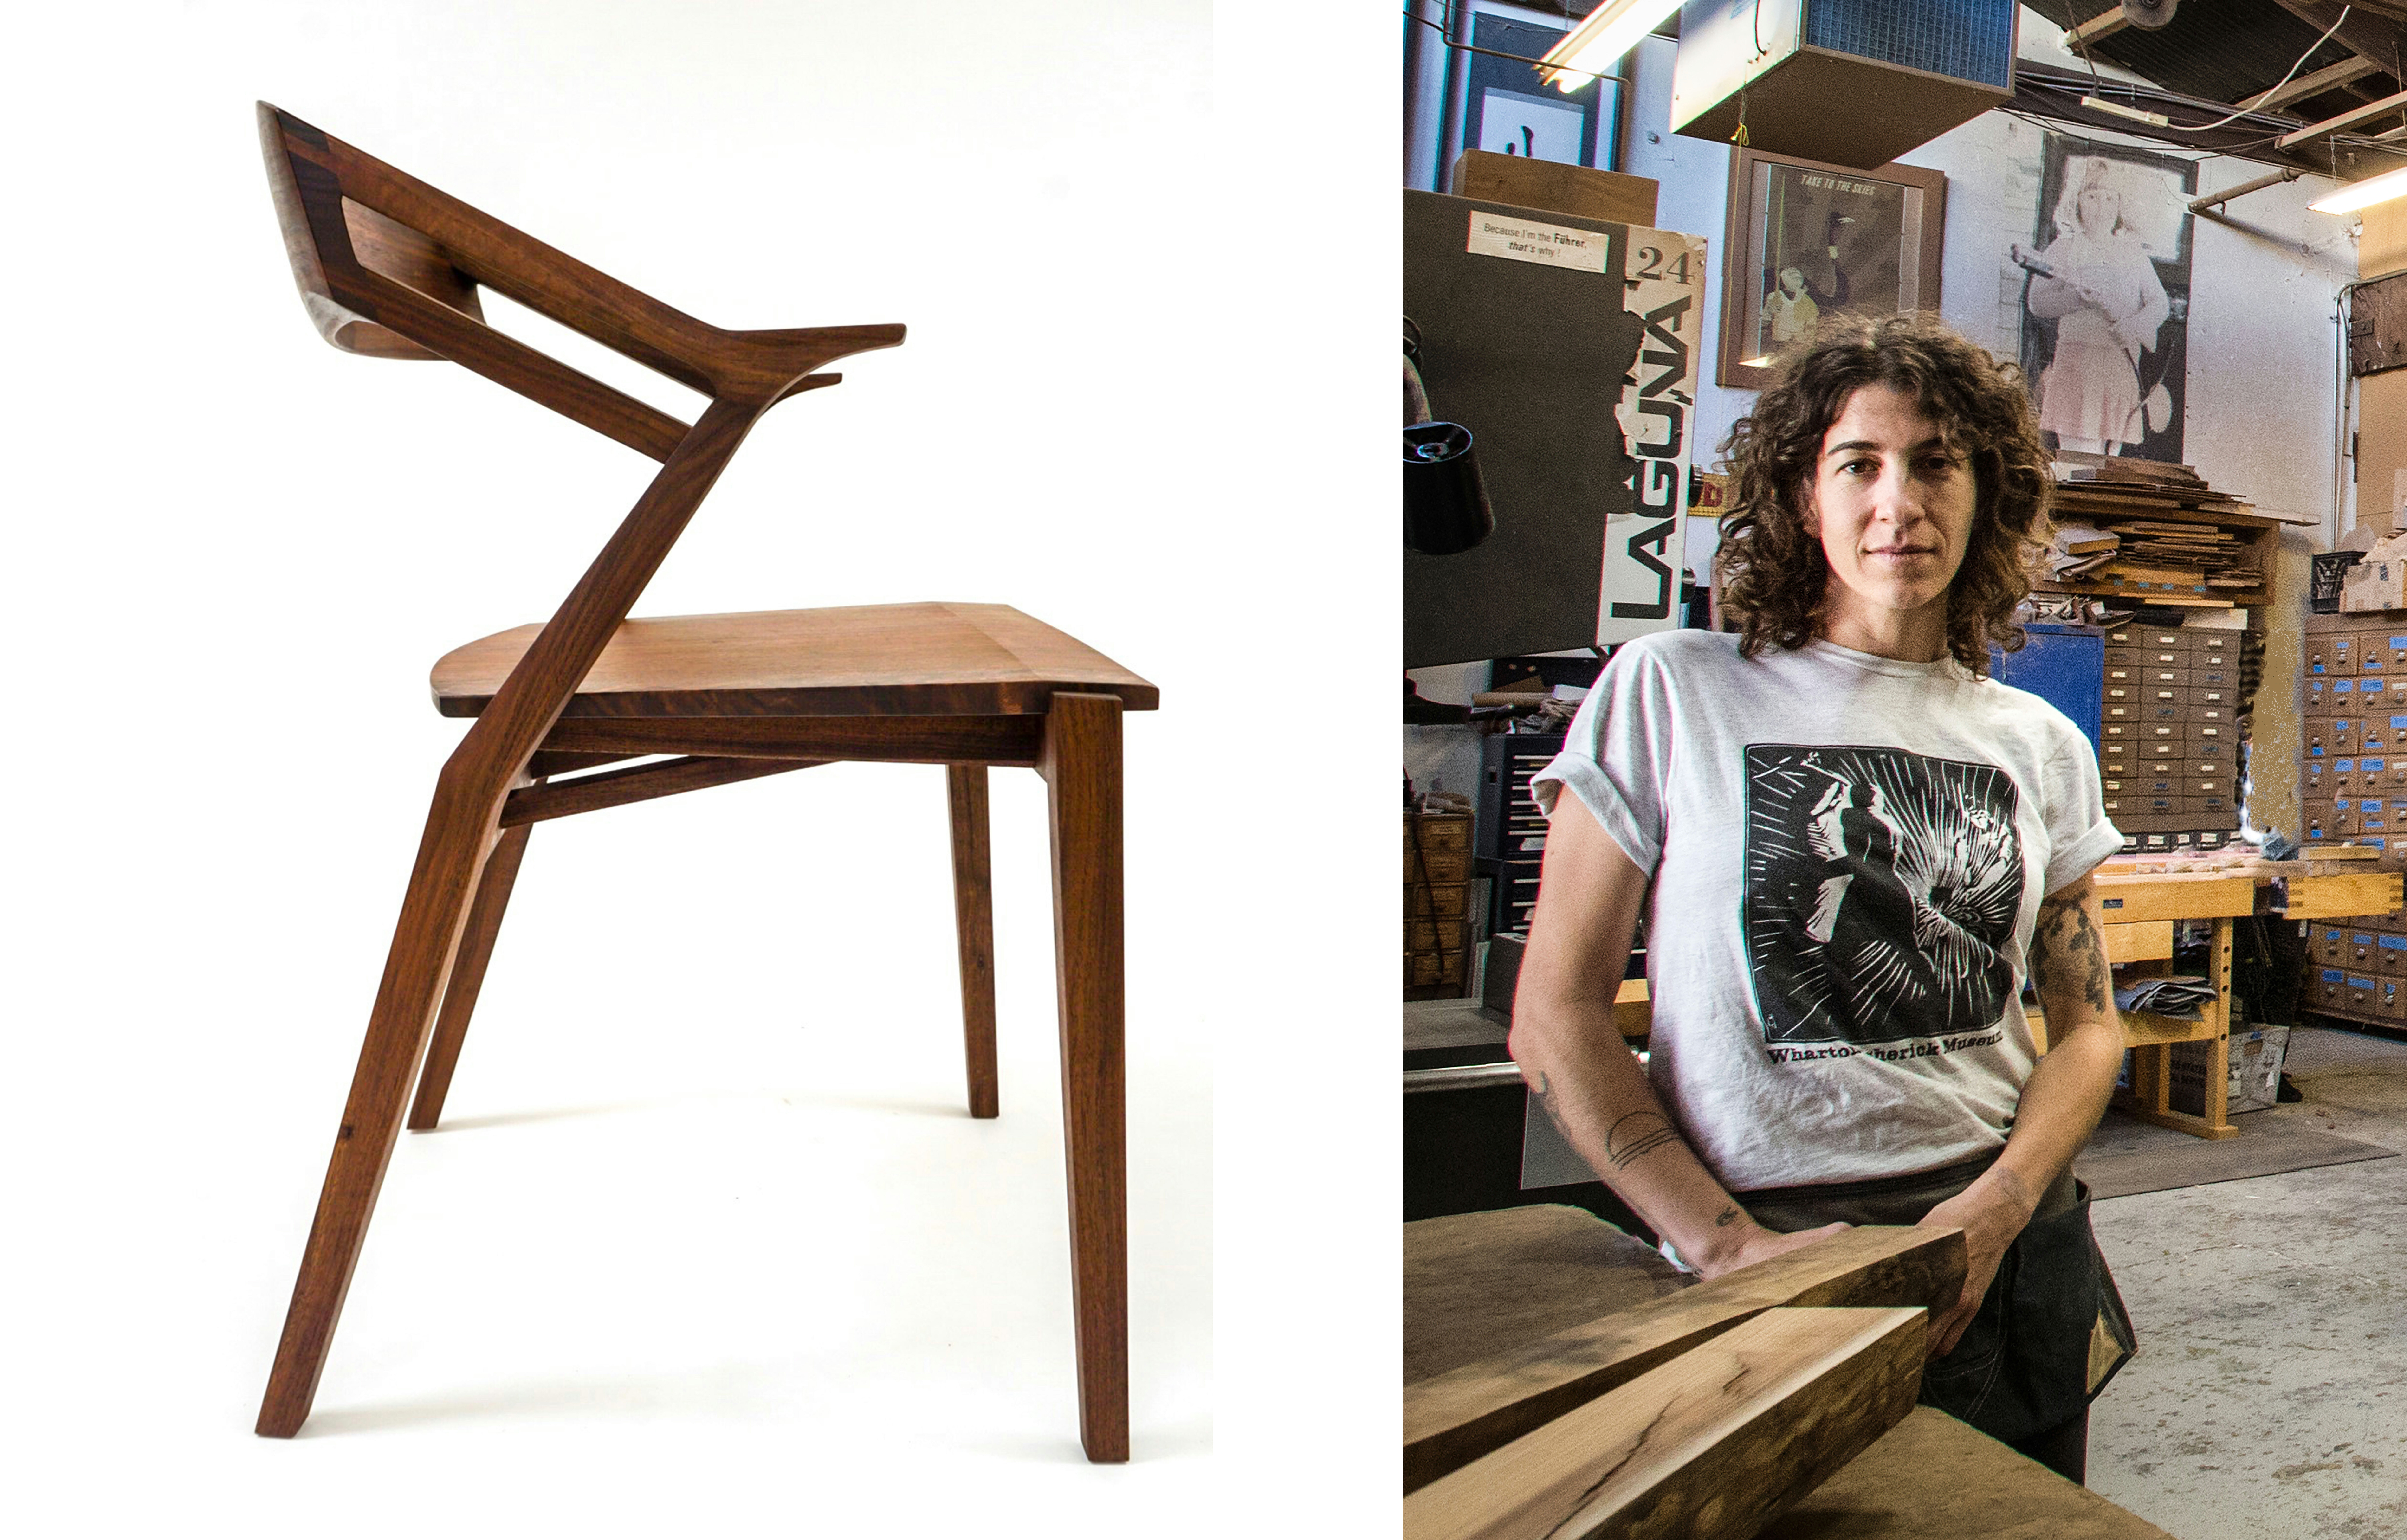 profile of chair on left and woman with curly brown hair standing in a woodshop on right